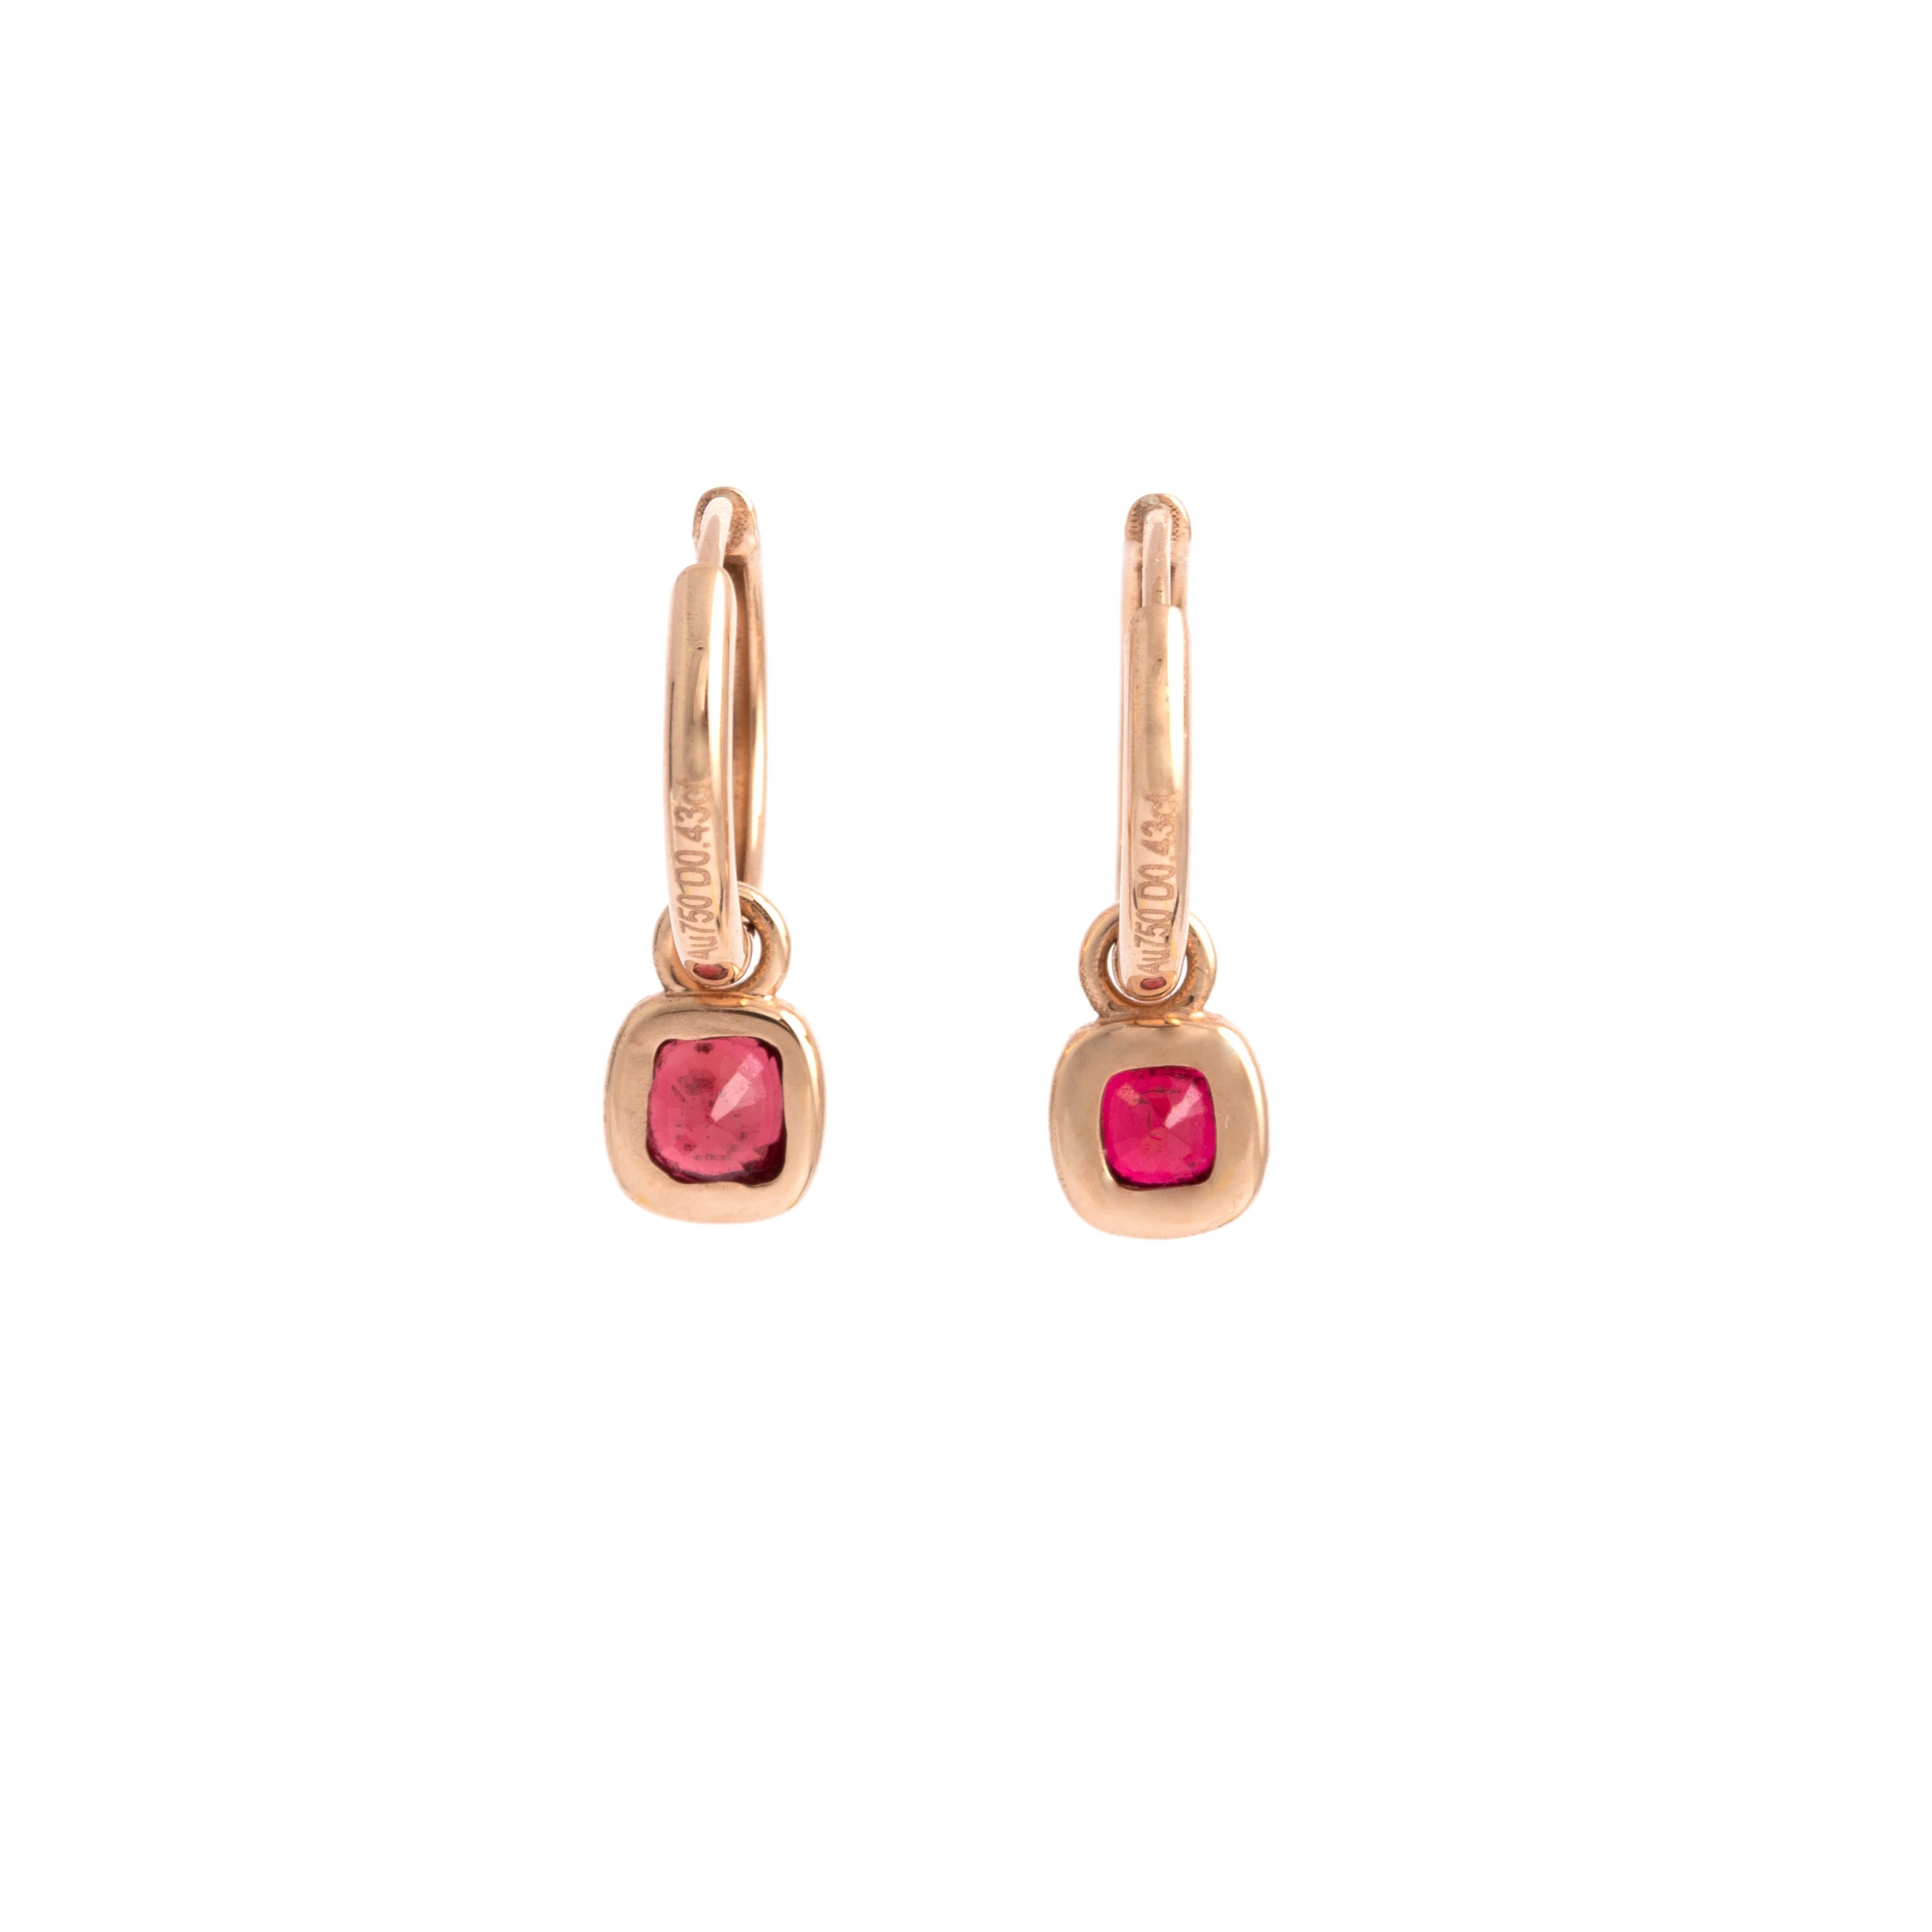 Natural Spinel 18K Gold Earrings and Ring.
Each Spinel is accompanied by a GRC report. According to the reports G2210270248, G2210270249 and G2210270250 Spinels are respectively Natural Burmese non heated. 0.80 carat, 0.38 carat and 0.47 carat.
Ring